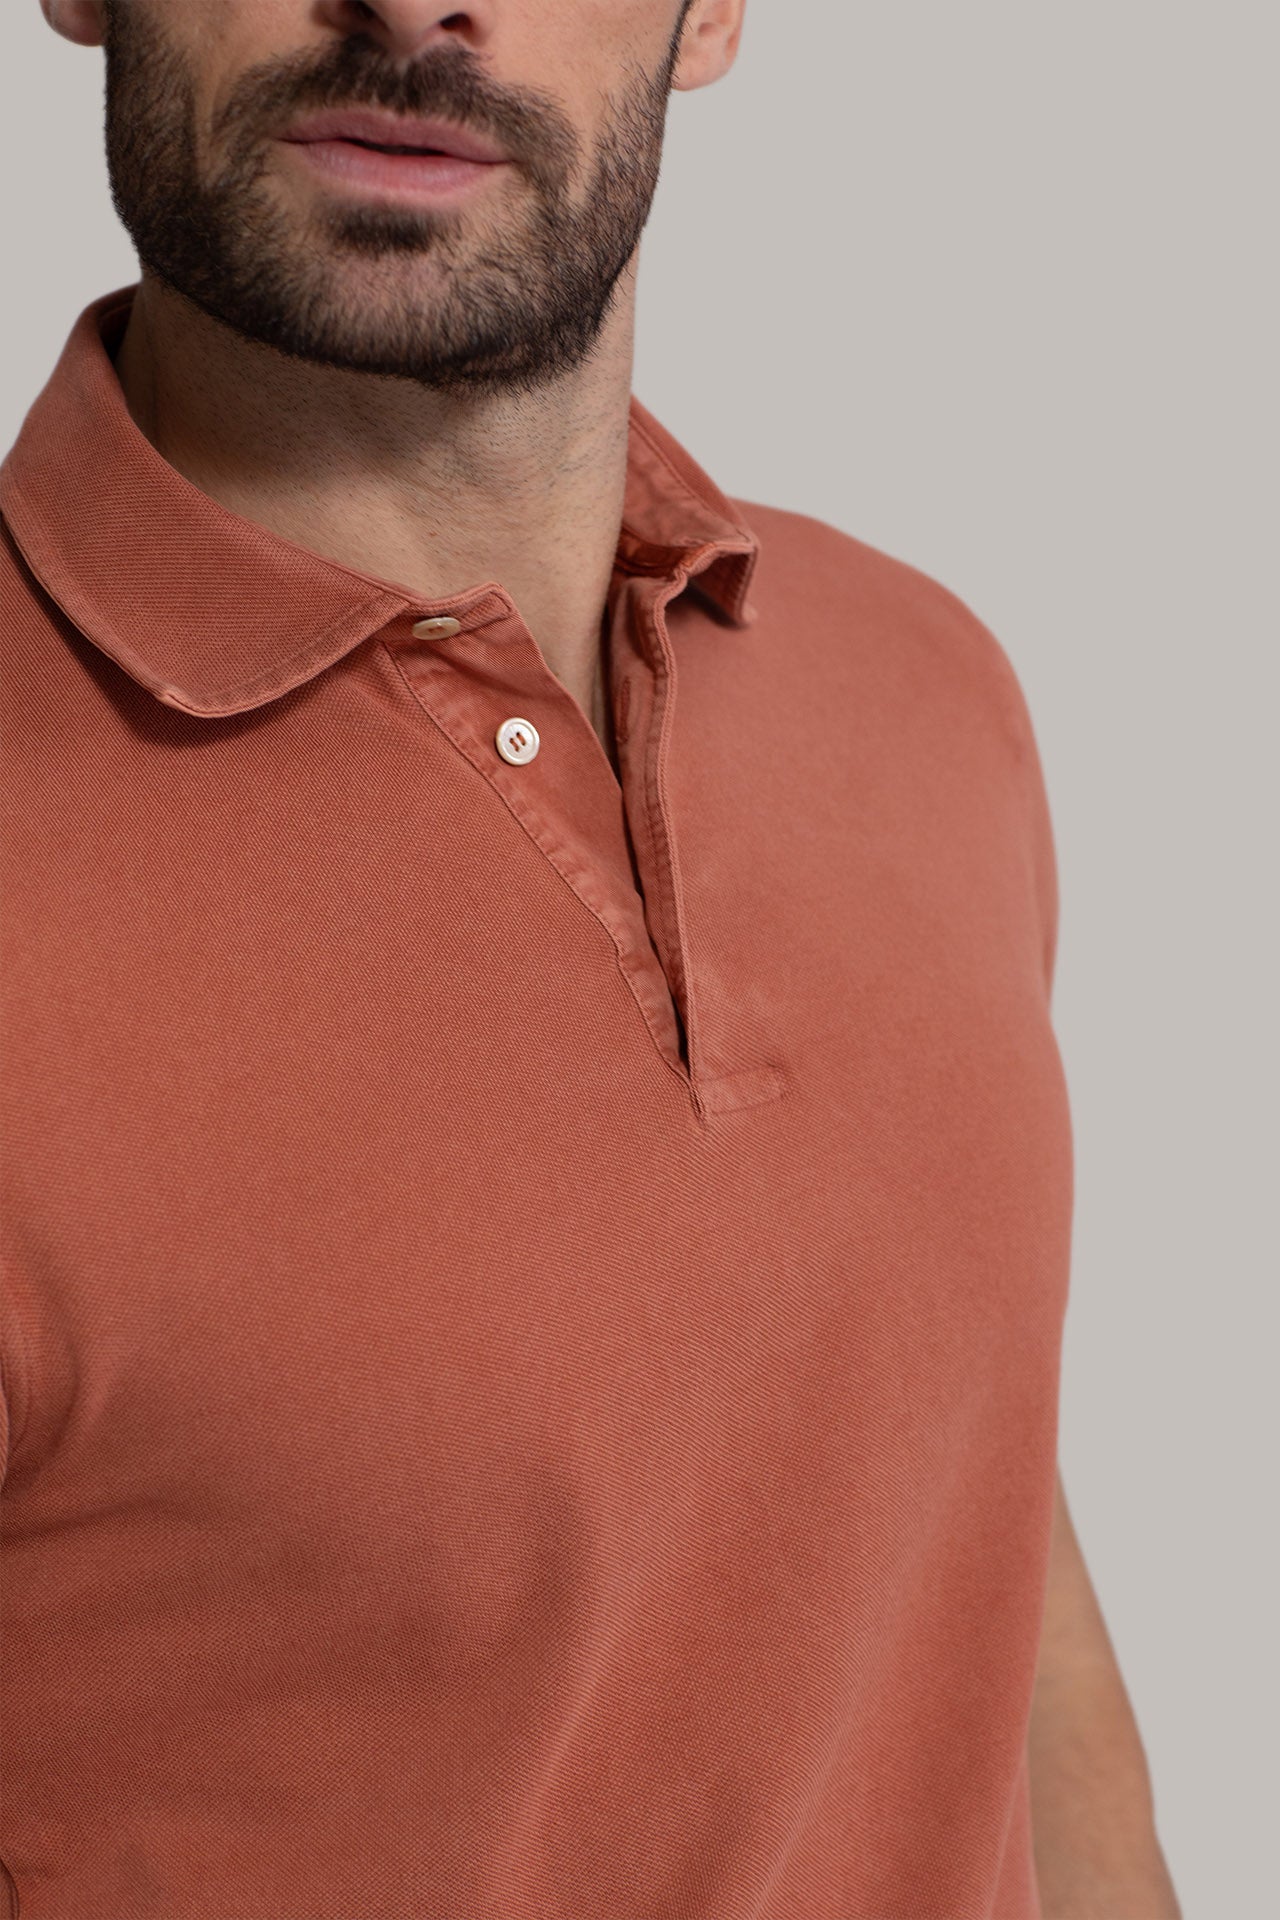 V-neck detail on the North short sleeves cotton polo in orange - side view